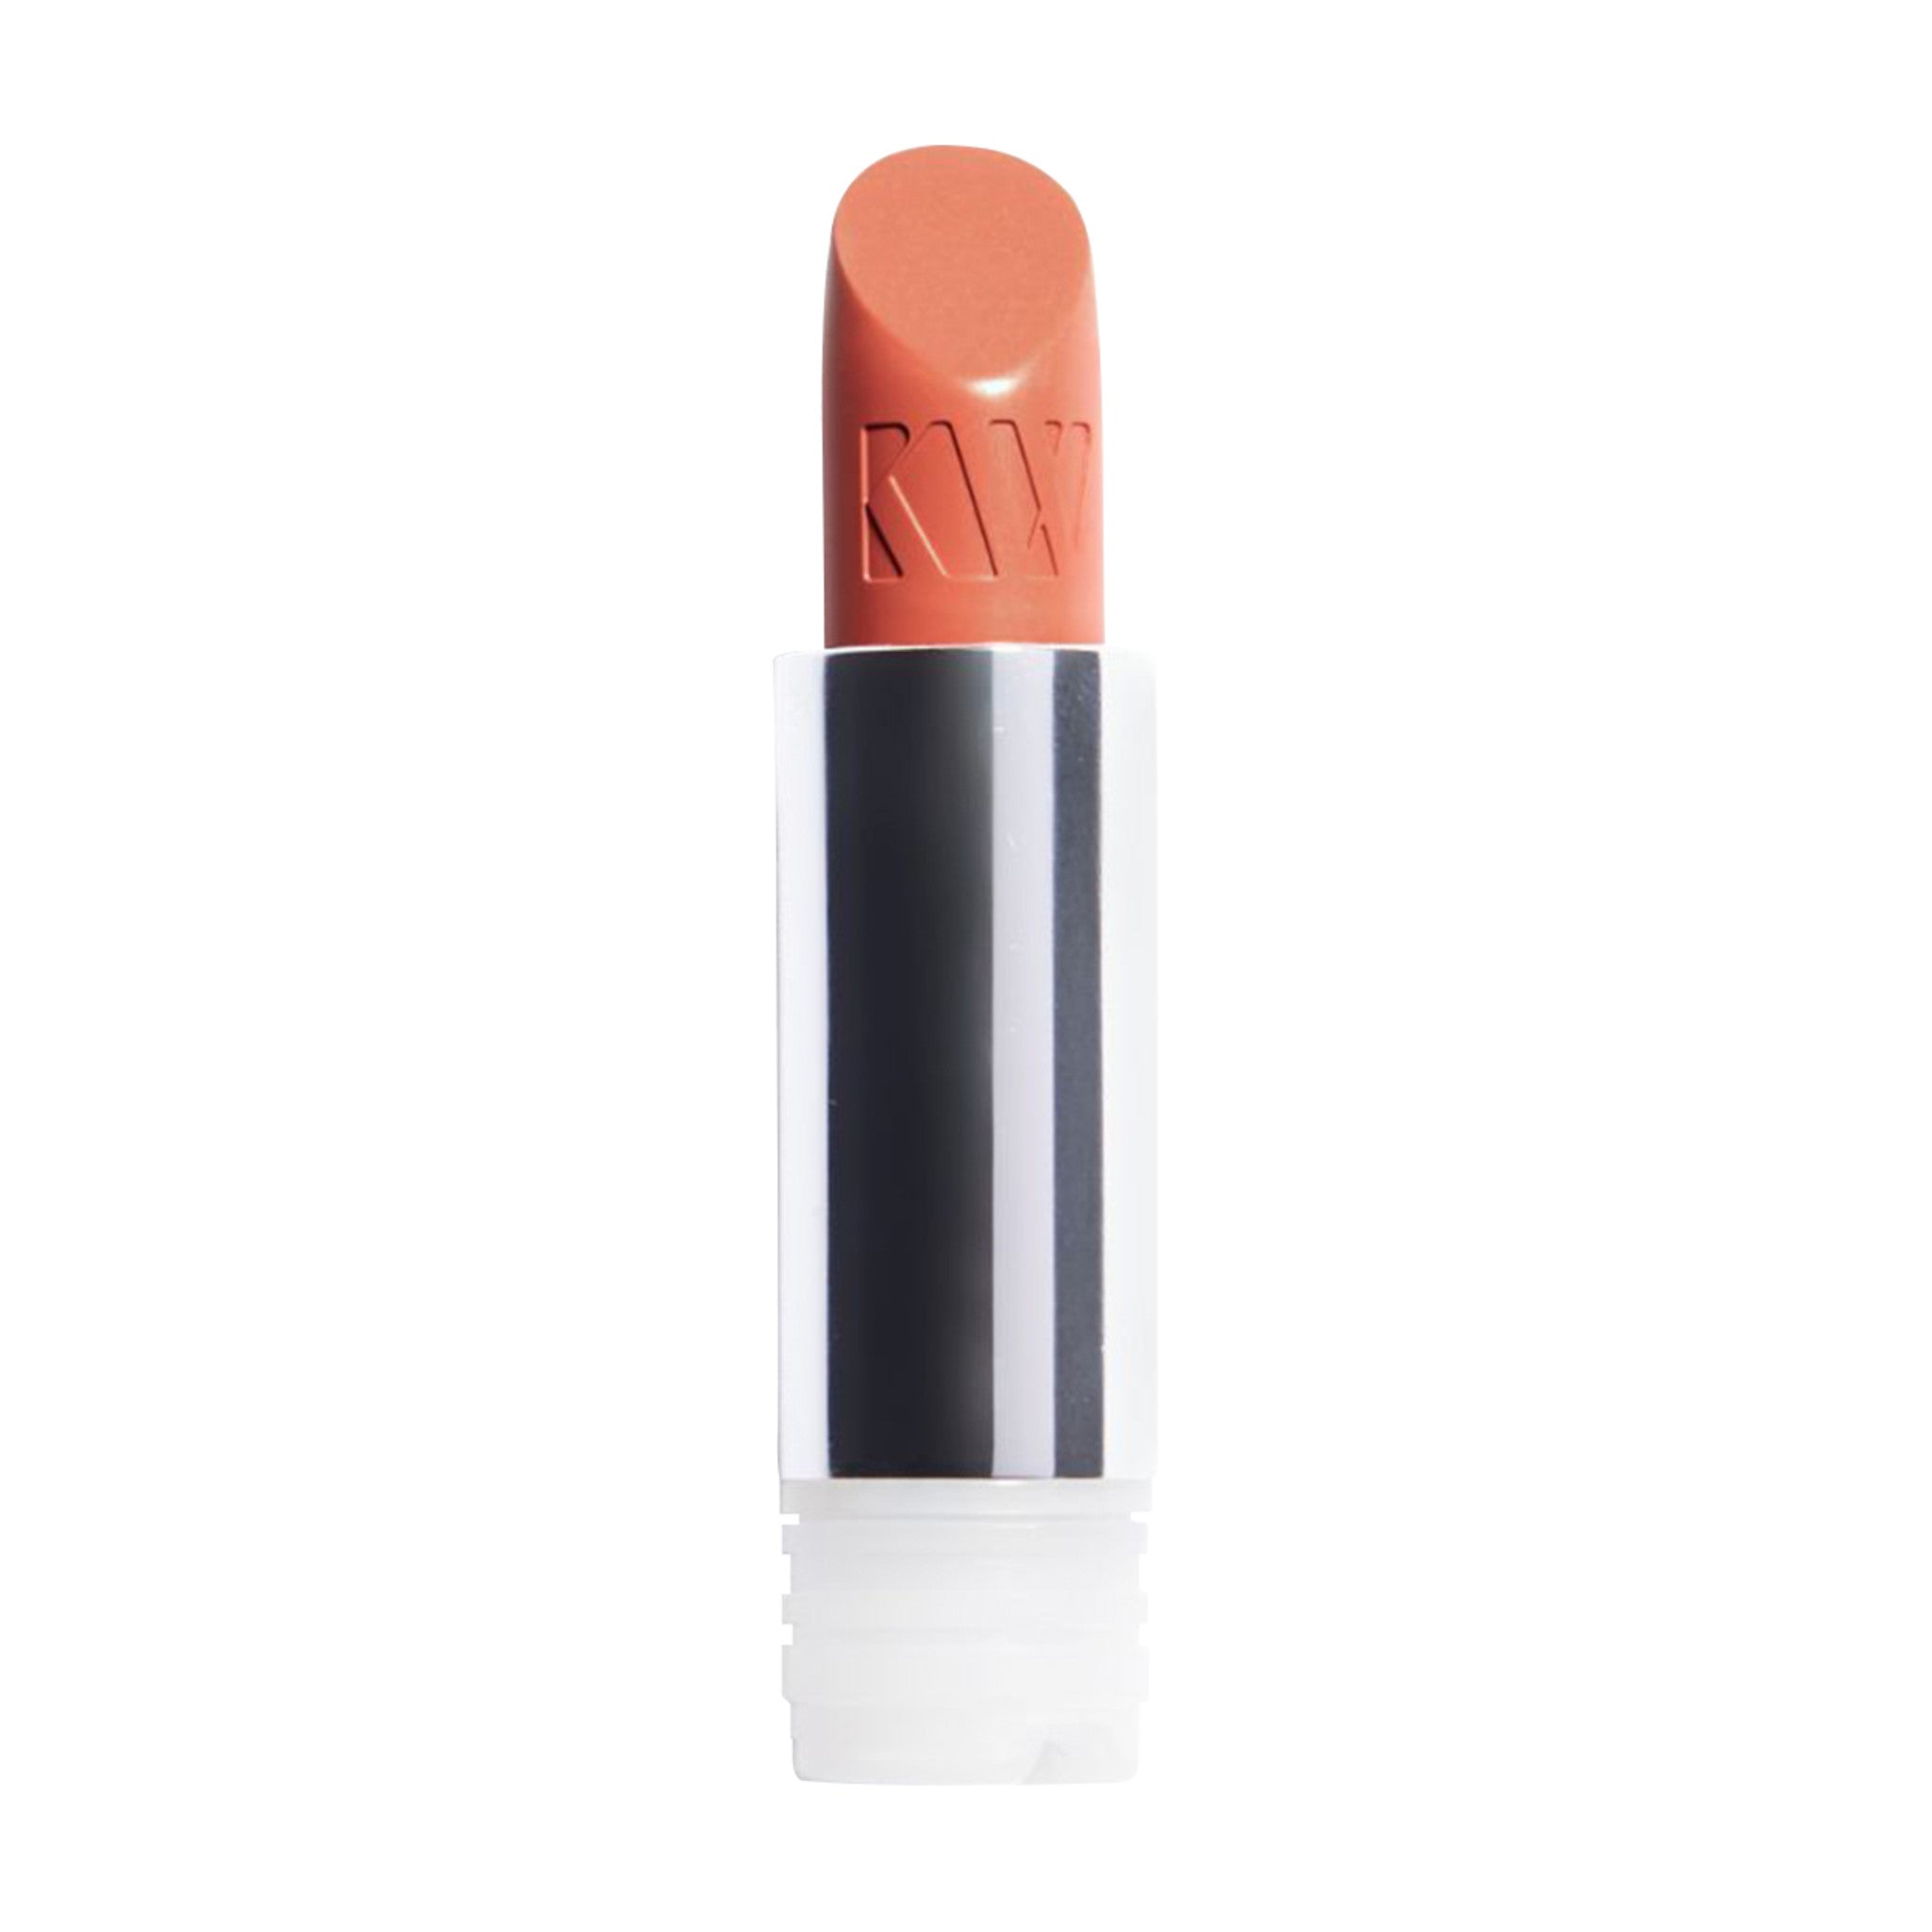 Kjaer Weis Lipstick Refill Color/Shade variant: Brillant main image. This product is in the color nude